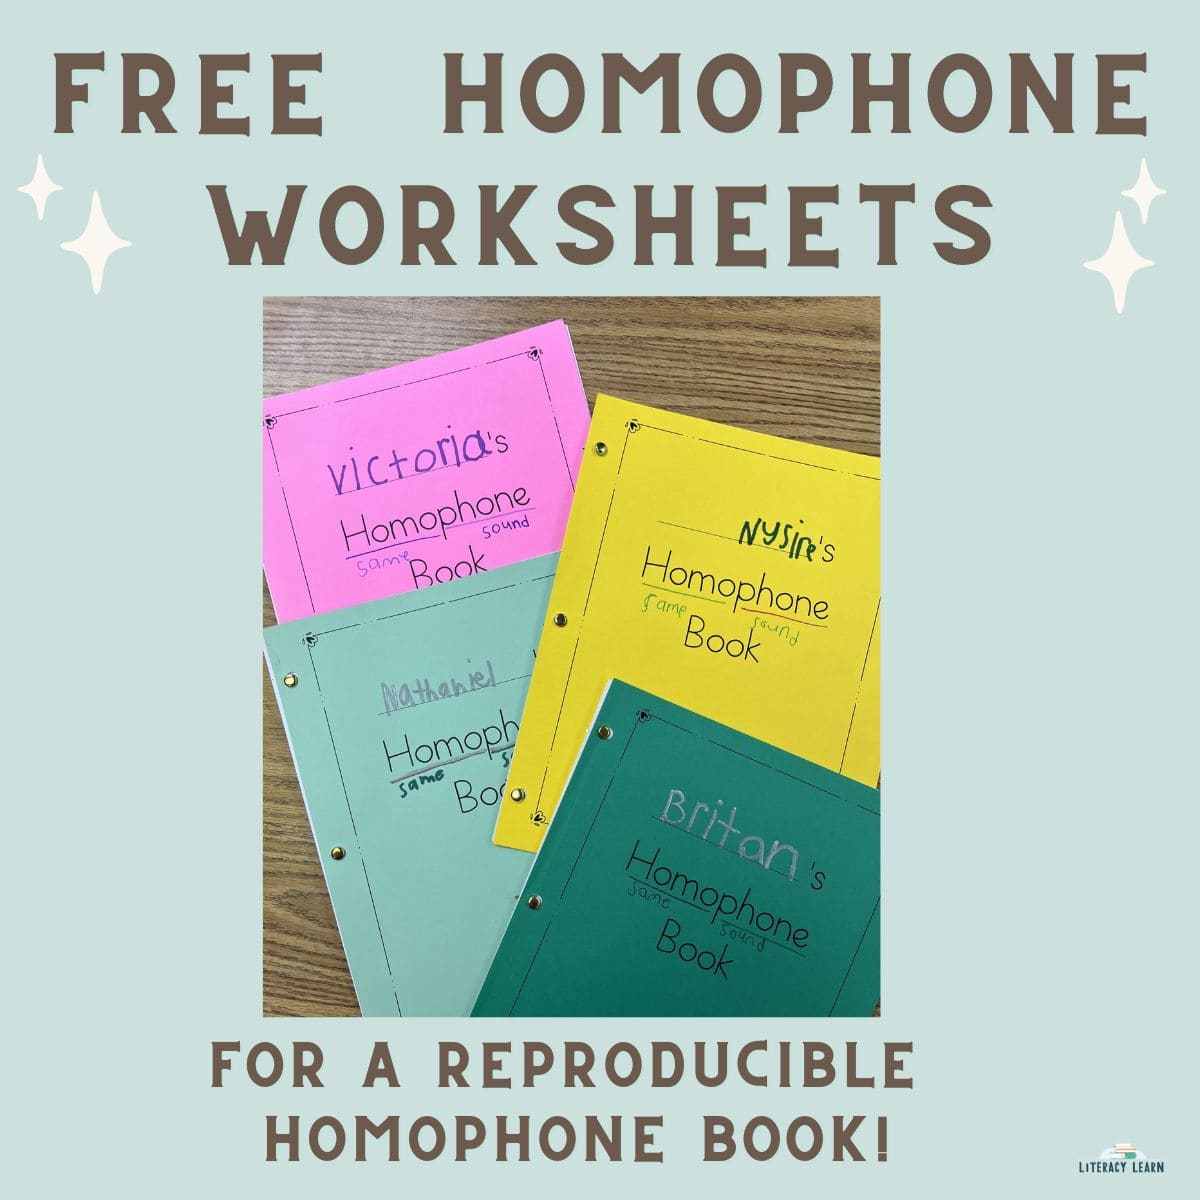 Photo of four students homophone books with "FREE HOMOPHONE WORKSHEETS" title.